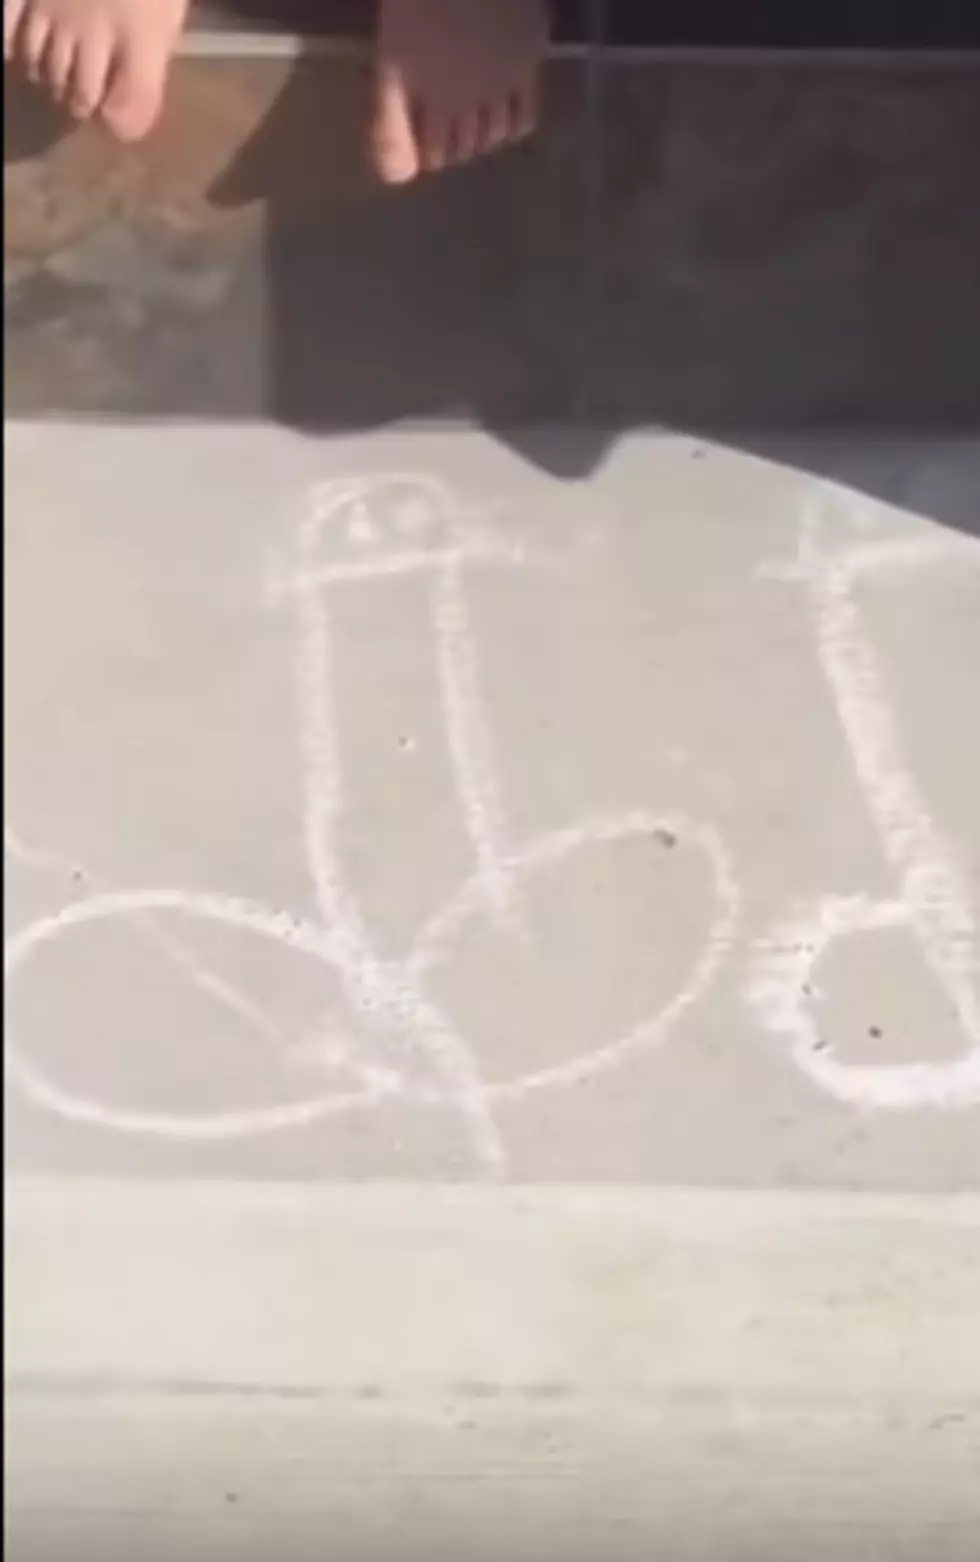 Little Girl Draws Family of ‘Giraffes’ on the Porch, You be the Judge [VIDEO]